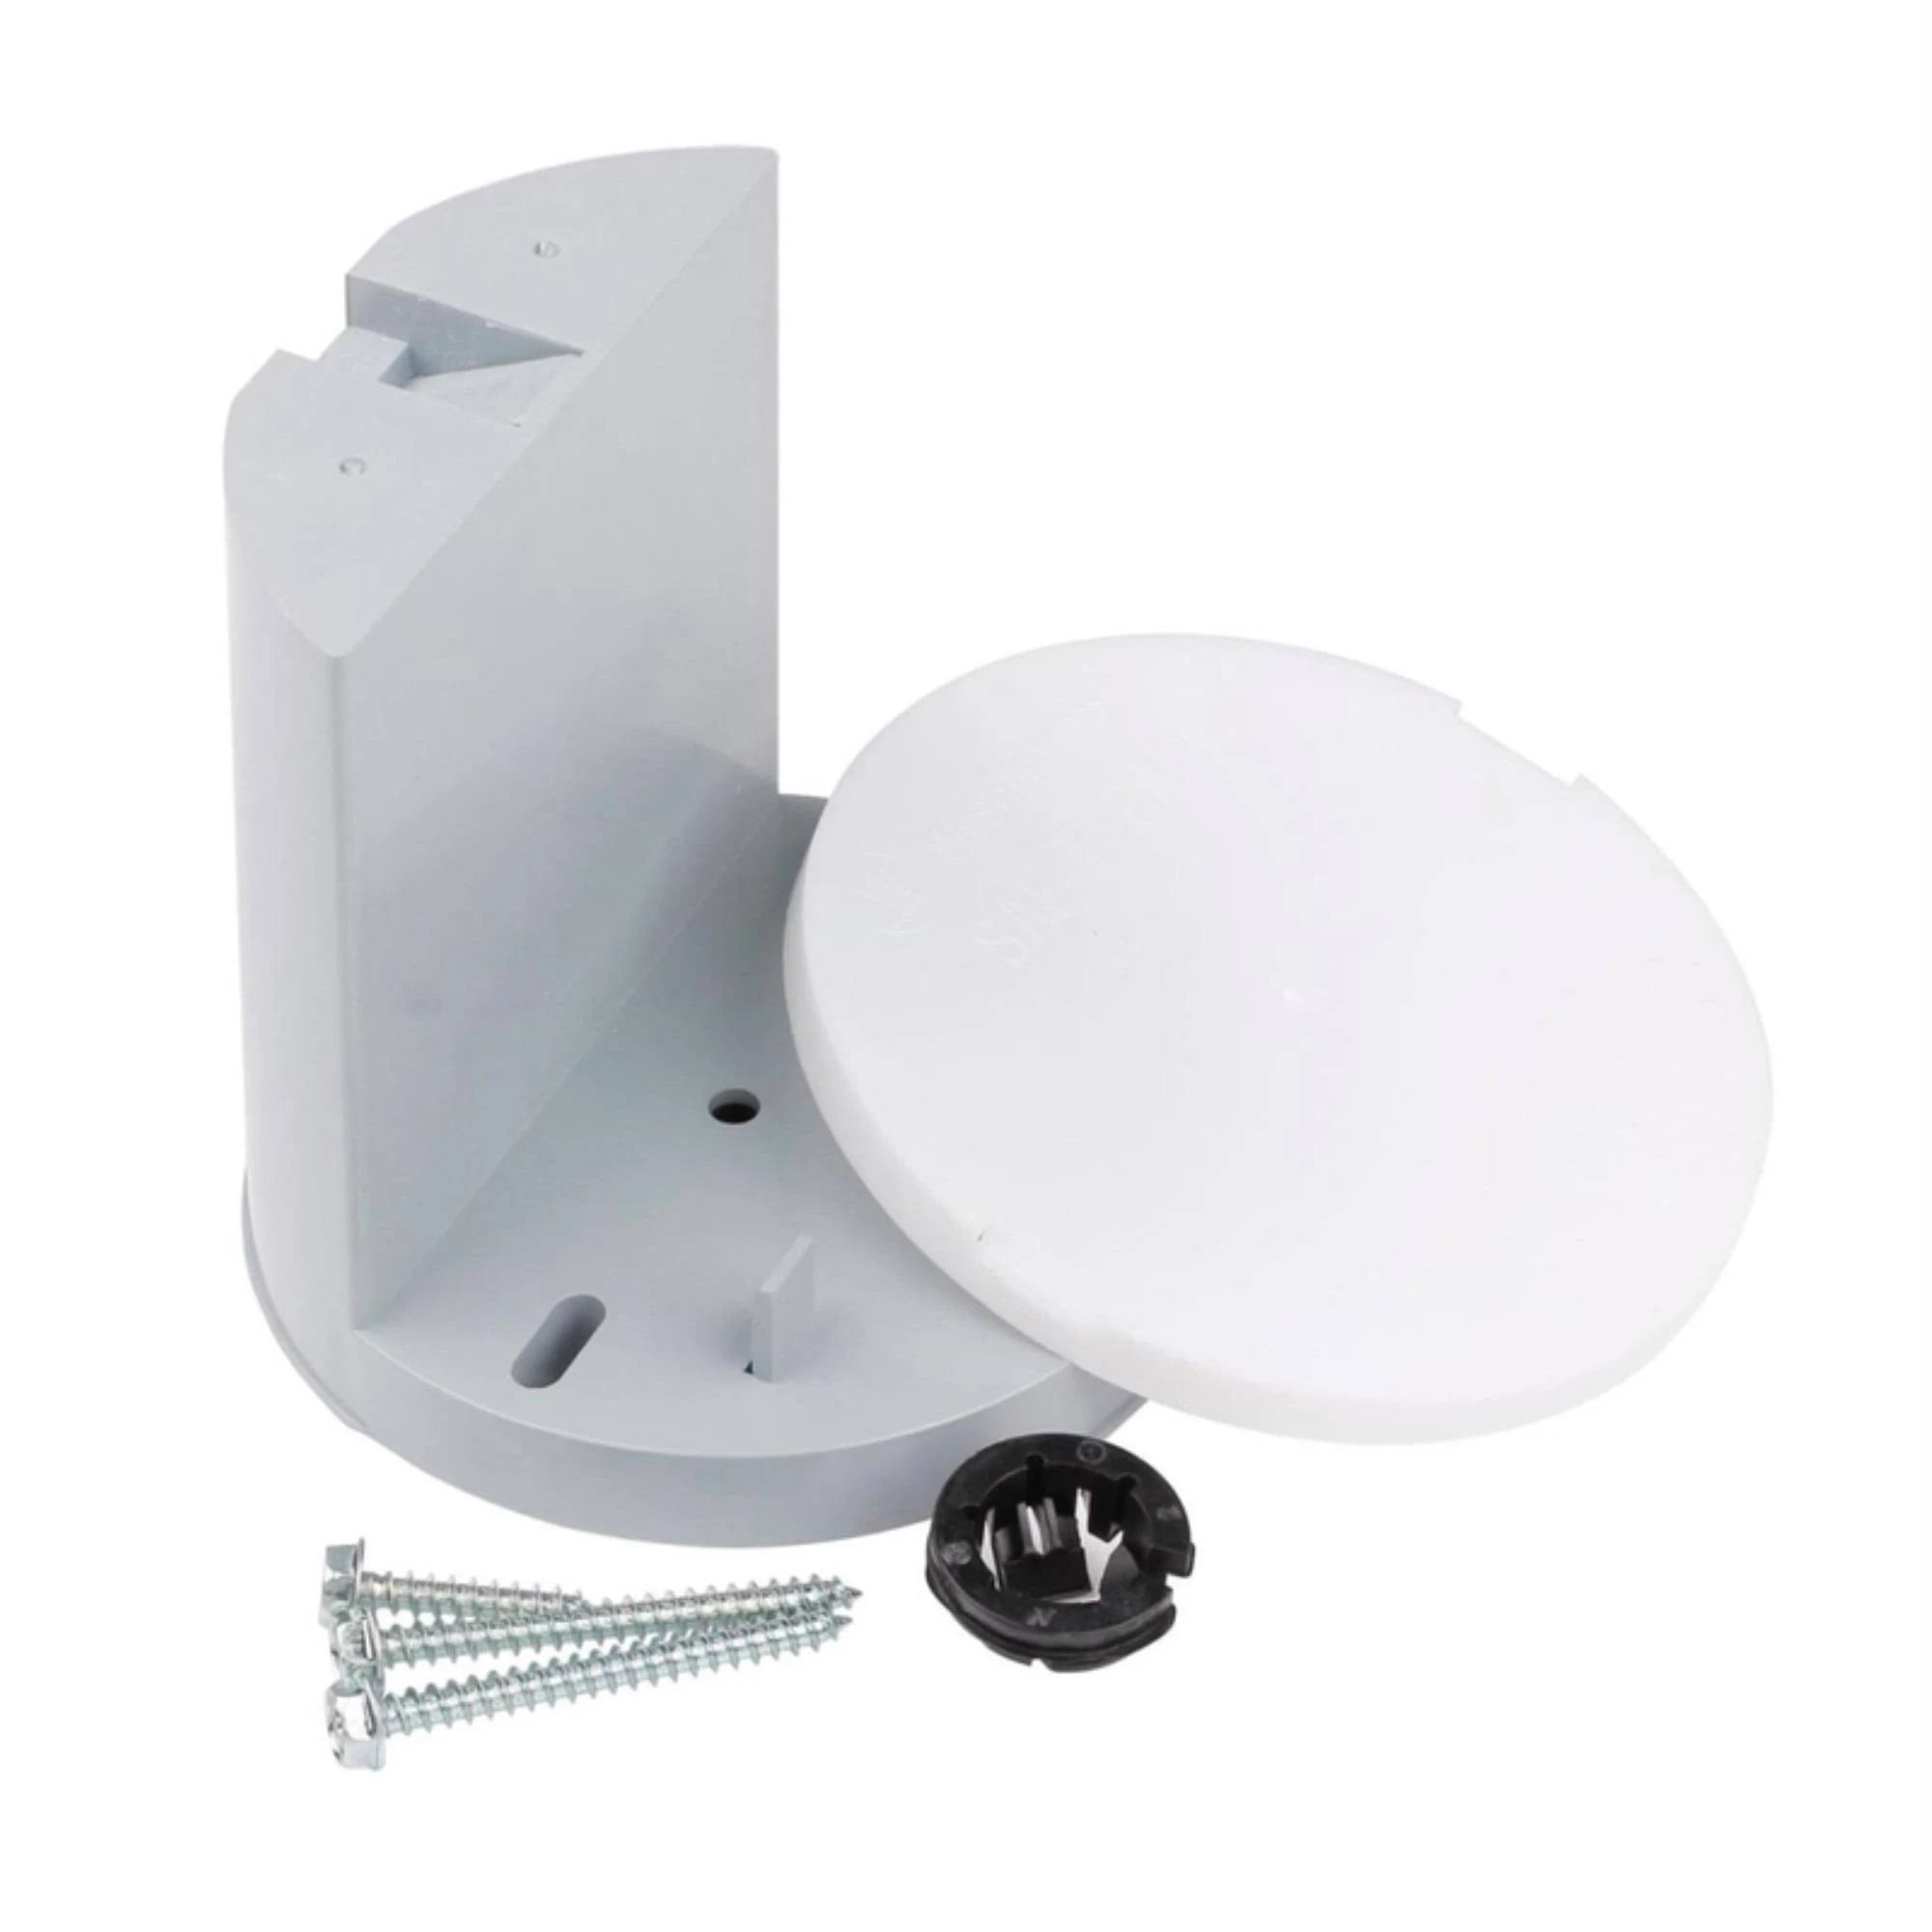 4" Non-Metallic Ceiling Fan Support Box - Saddle Type